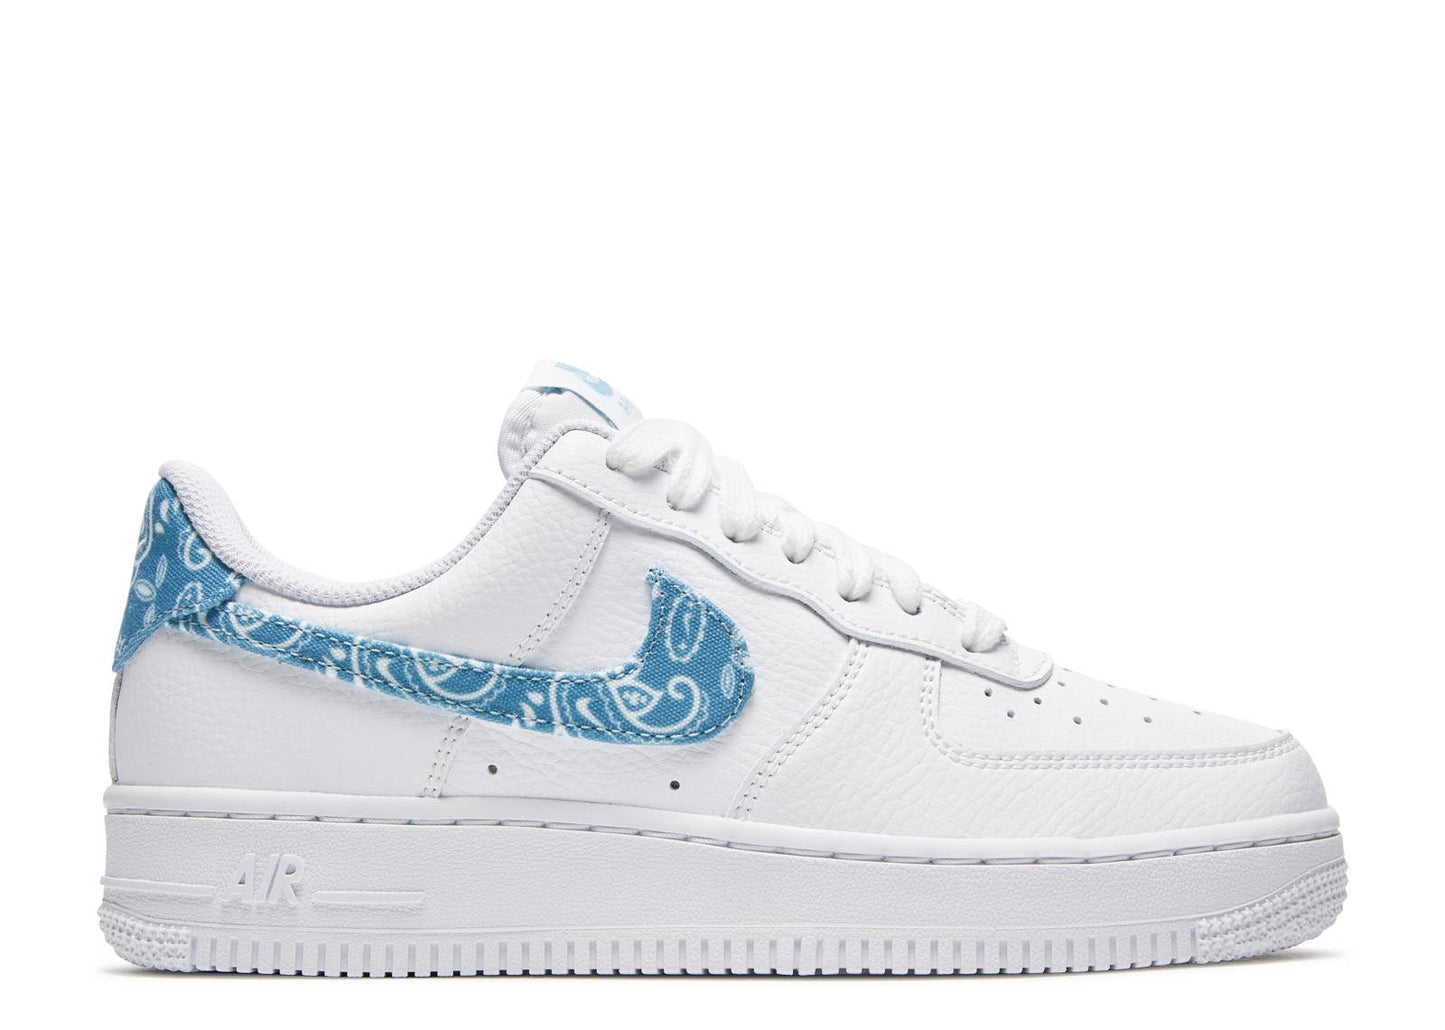 Nike Air Force 1 Low 'Essential Blue Paisley' (W)